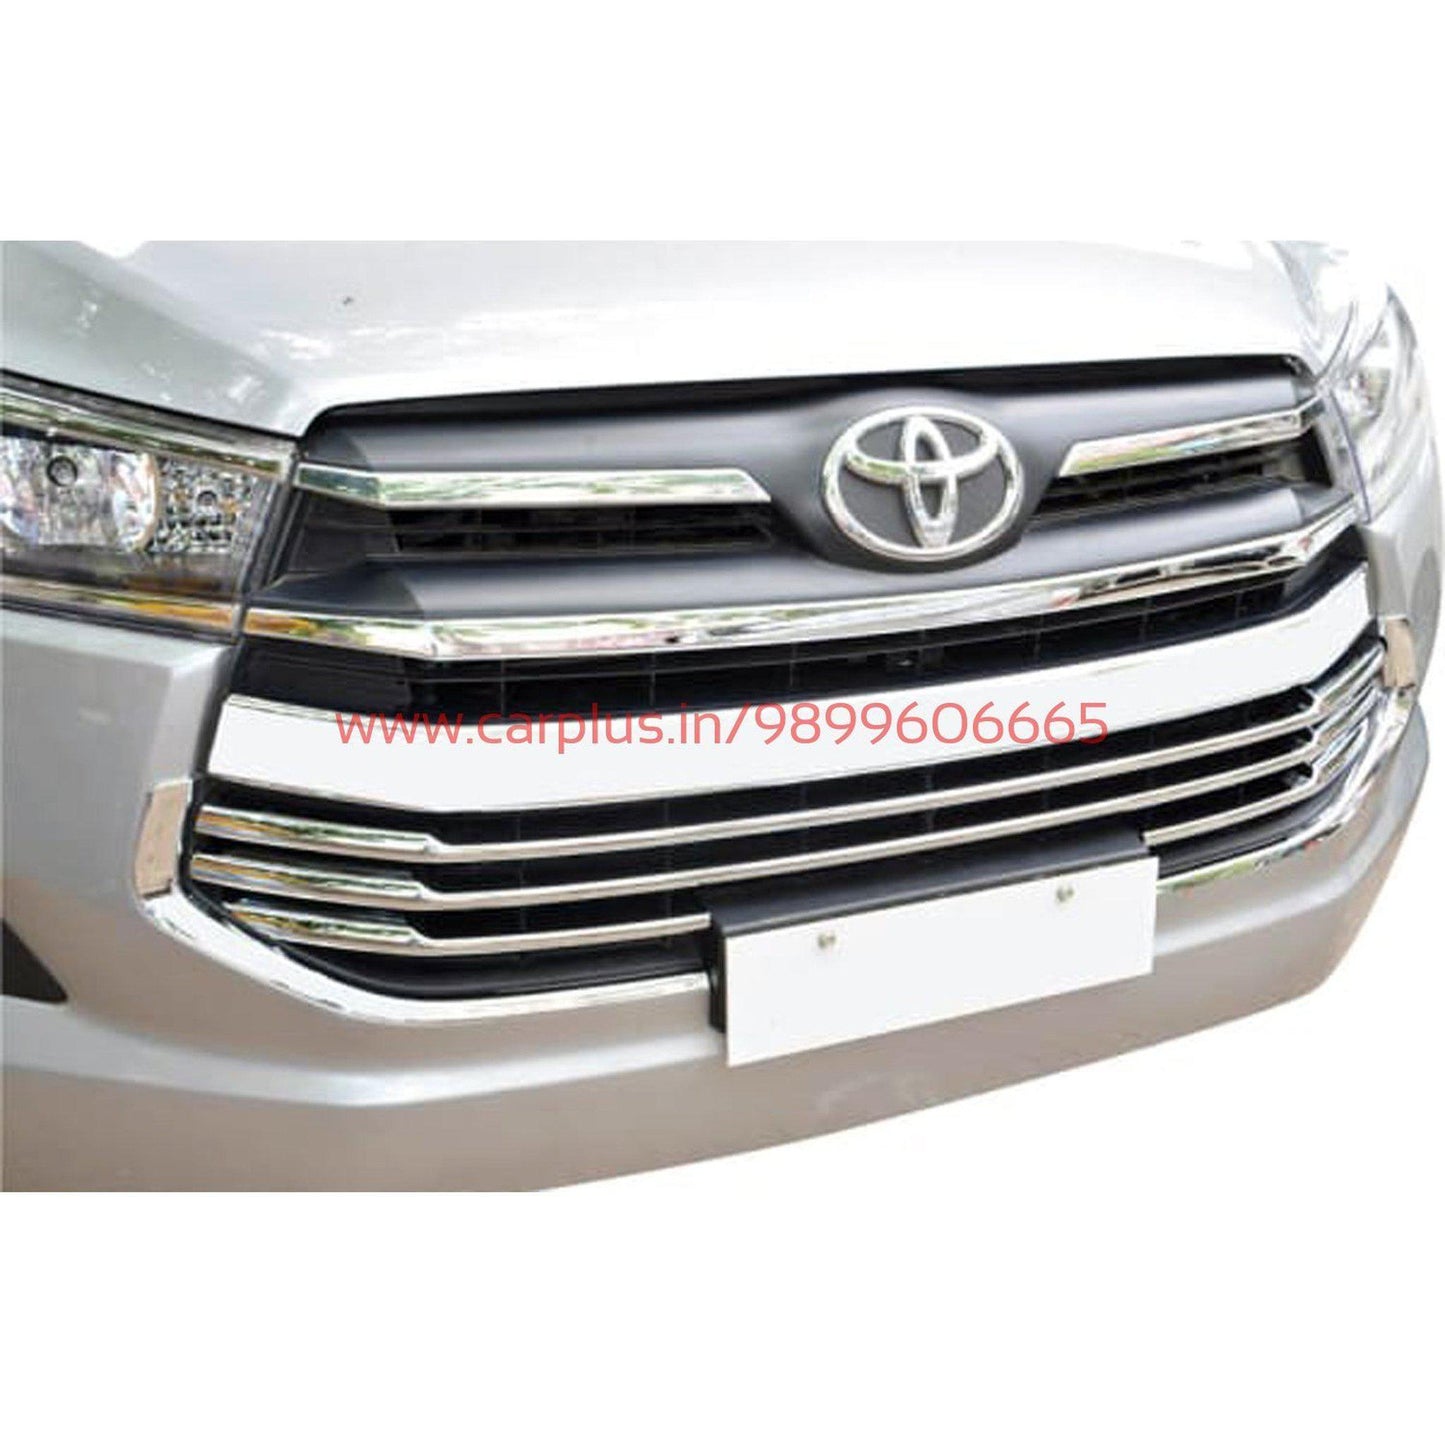 
                  
                    KMH Front Grill for Toyota Innova (Set of 4 Pcs) CN LEAGUE EXTERIOR.
                  
                